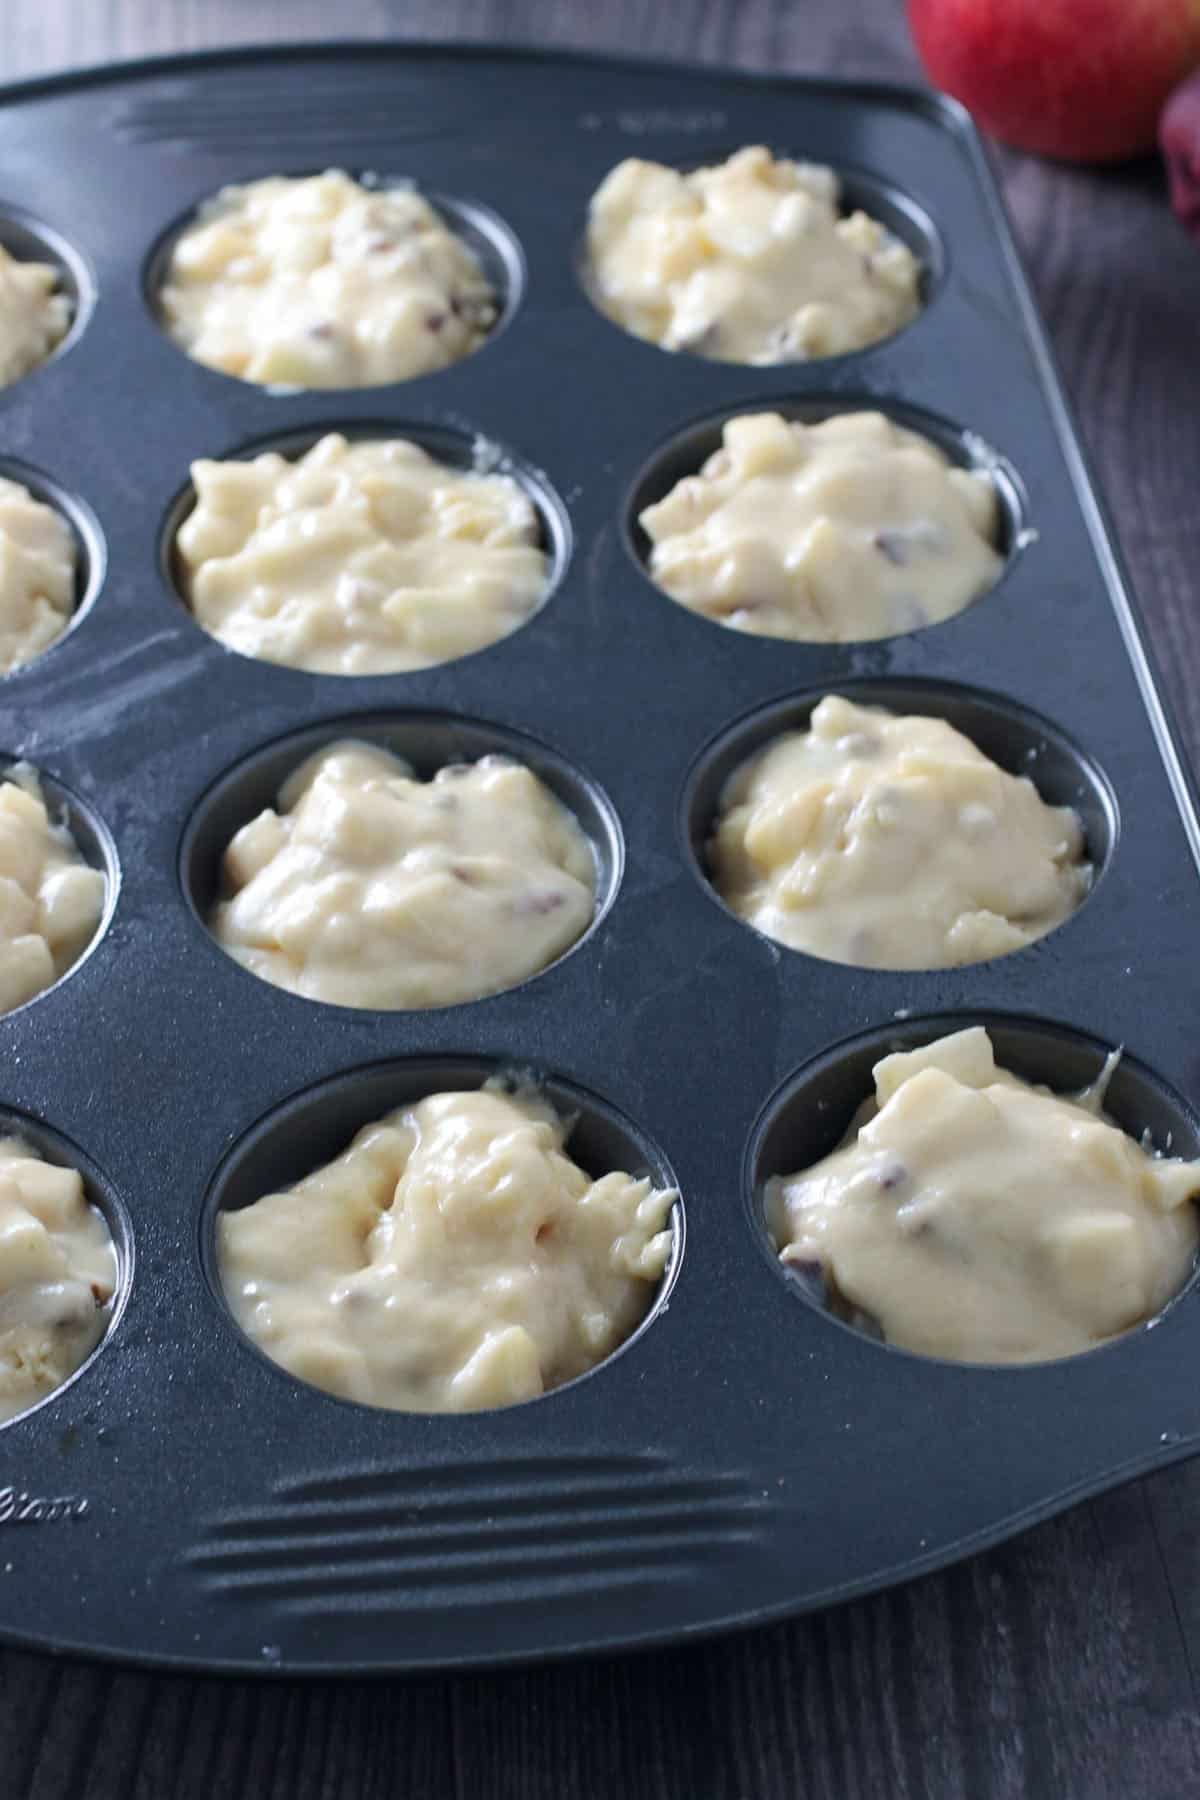 The cornbread muffin batter scooped into a muffin pan, ready for baking.